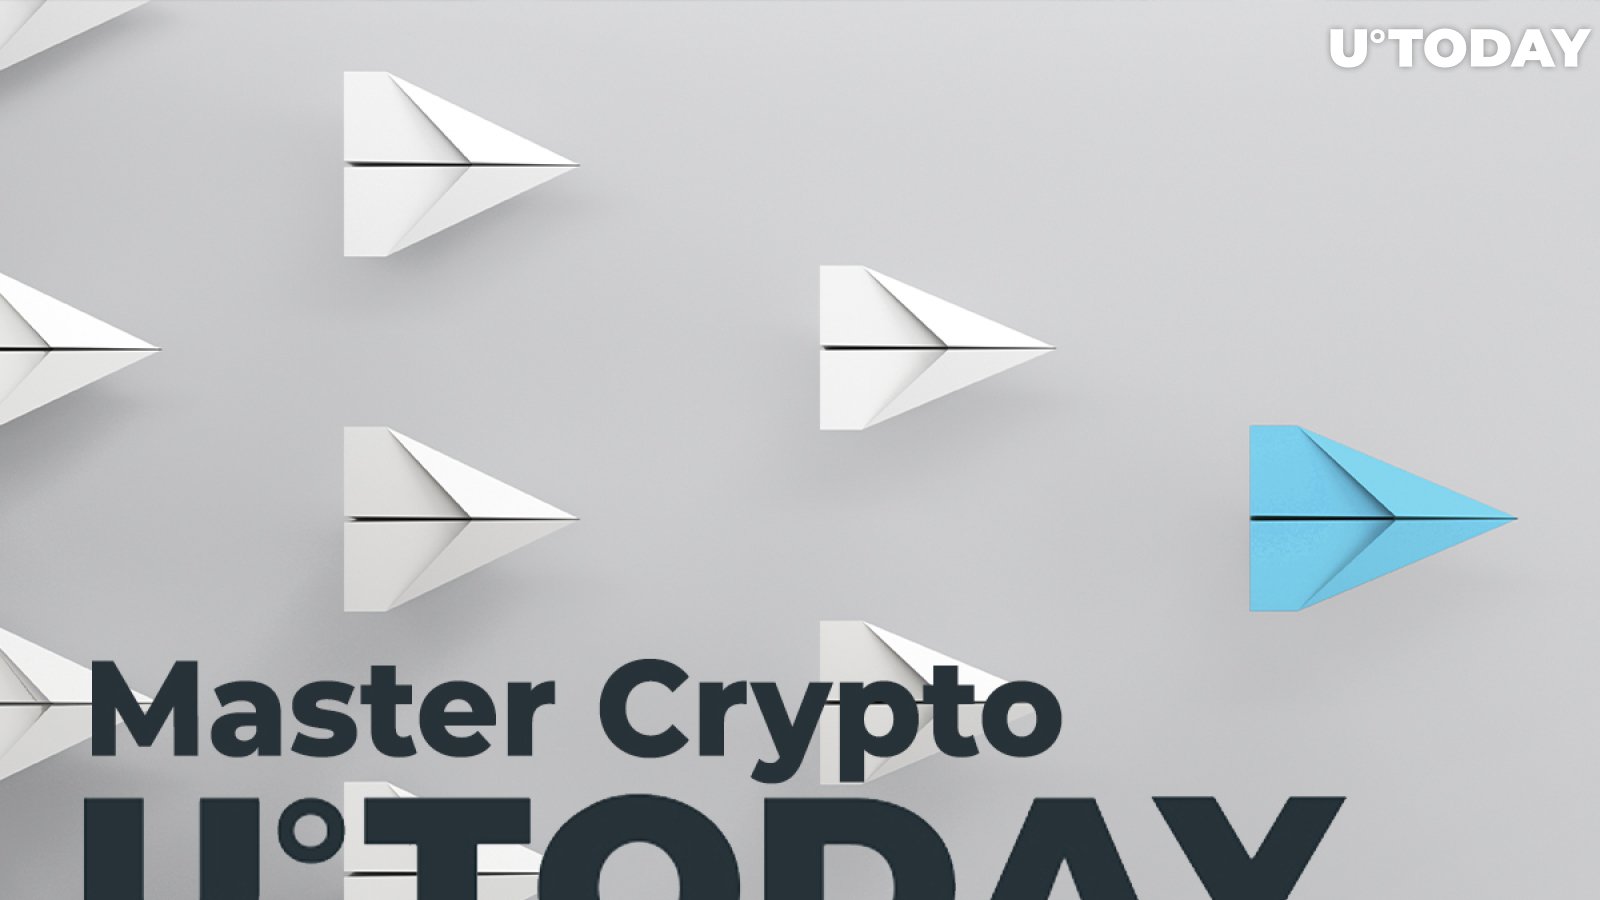 You Can Now Follow U.Today On Master Crypto